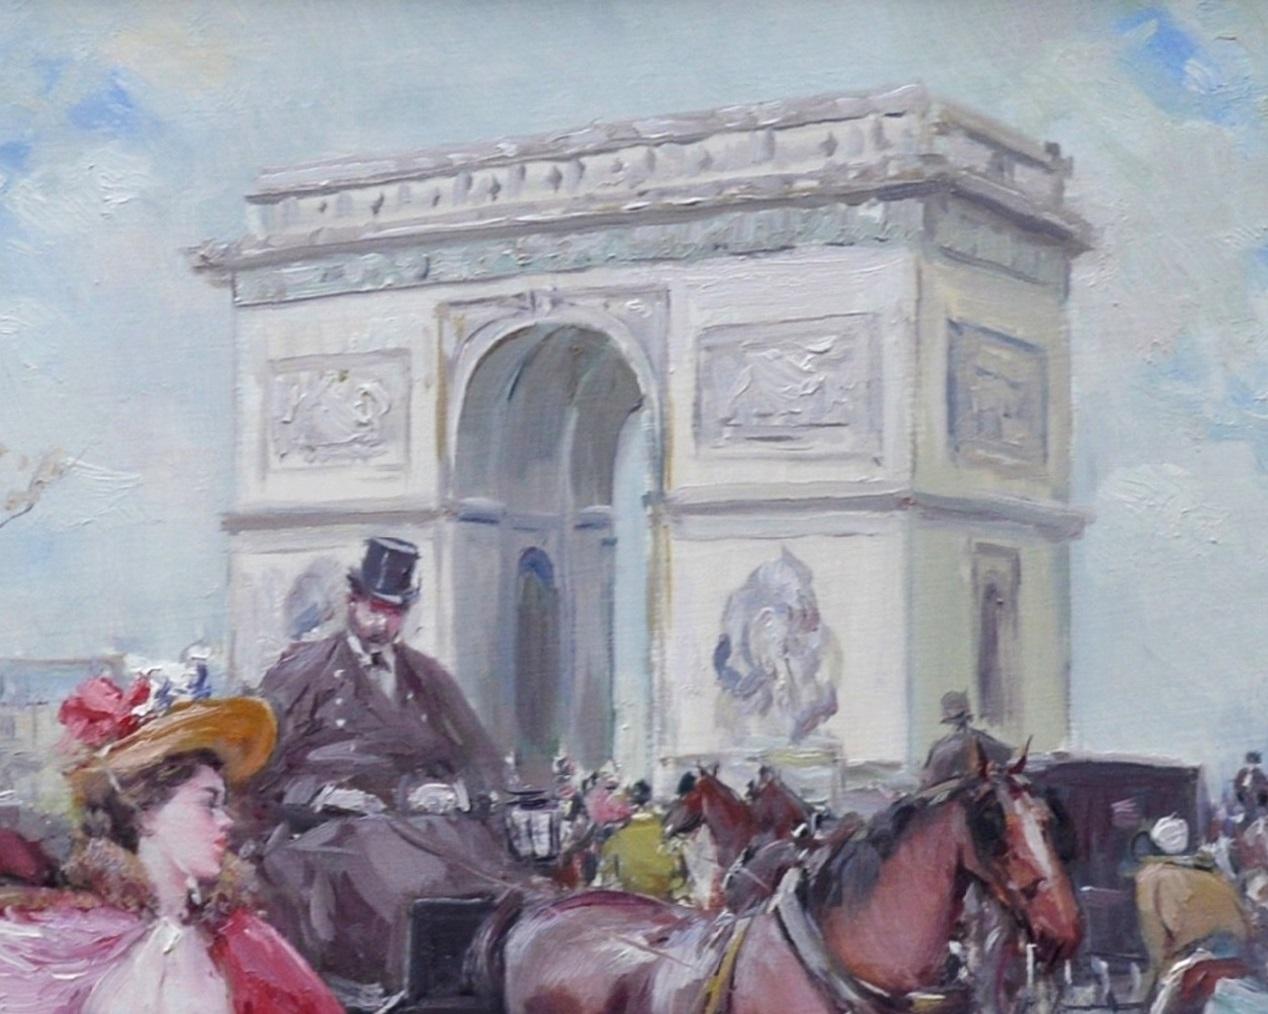 An original oil on canvas depicting a late 19th century scene near ‘L’arc de Triomphe’ in Paris, France by the popular Spanish Post-Impressionist painter Juan Soler (1940-). The painting is signed by the artist and hangs in a very good quality